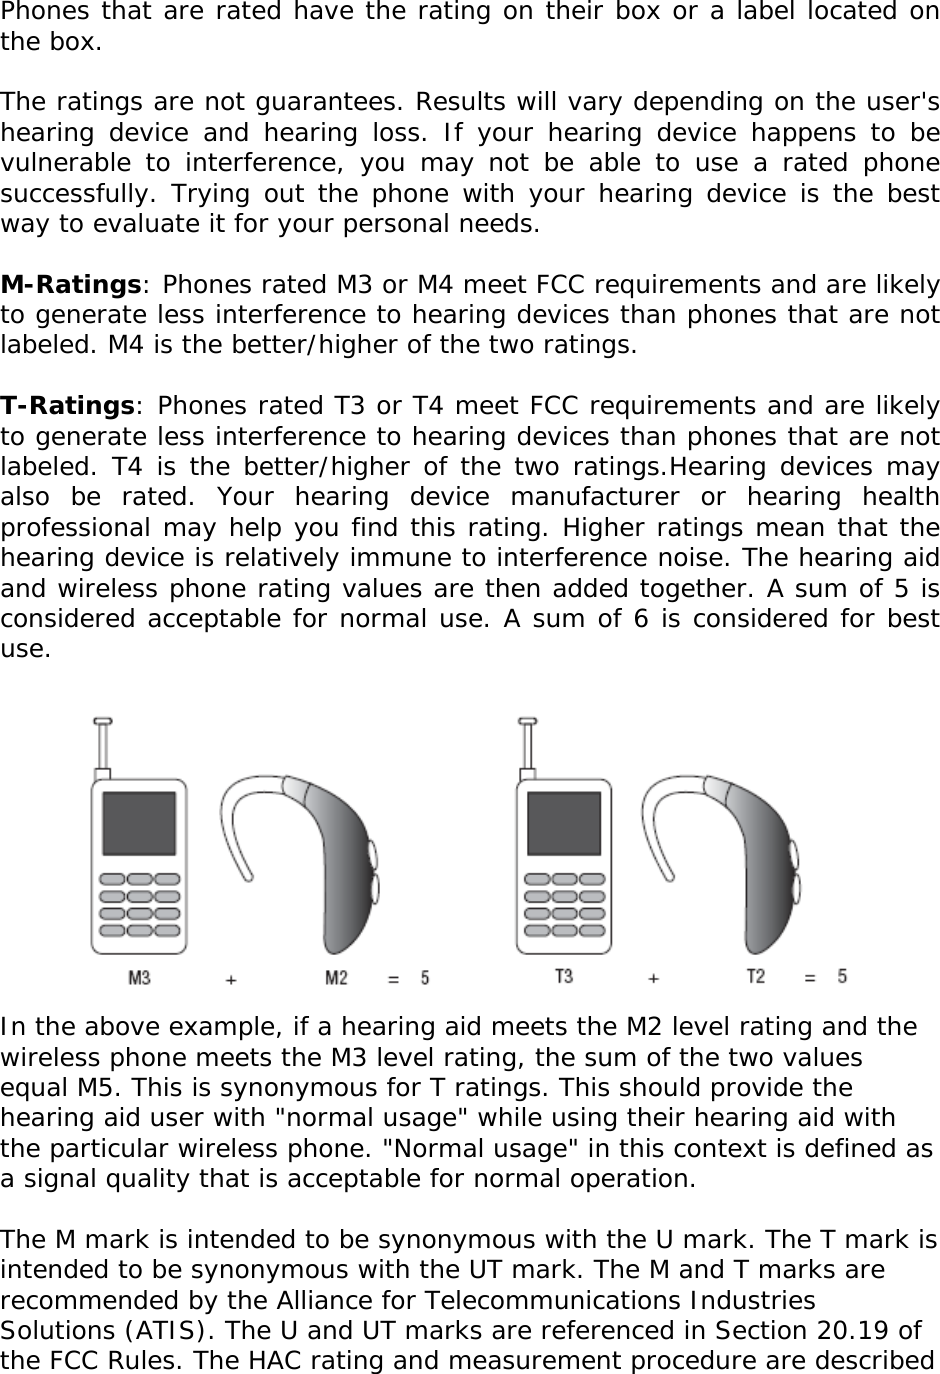  Phones that are rated have the rating on their box or a label located on the box.   The ratings are not guarantees. Results will vary depending on the user&apos;s hearing device and hearing loss. If your hearing device happens to be vulnerable to interference, you may not be able to use a rated phone successfully. Trying out the phone with your hearing device is the best way to evaluate it for your personal needs.  M-Ratings: Phones rated M3 or M4 meet FCC requirements and are likely to generate less interference to hearing devices than phones that are not labeled. M4 is the better/higher of the two ratings.  T-Ratings: Phones rated T3 or T4 meet FCC requirements and are likely to generate less interference to hearing devices than phones that are not labeled. T4 is the better/higher of the two ratings.Hearing devices may also be rated. Your hearing device manufacturer or hearing health professional may help you find this rating. Higher ratings mean that the hearing device is relatively immune to interference noise. The hearing aid and wireless phone rating values are then added together. A sum of 5 is considered acceptable for normal use. A sum of 6 is considered for best use.   In the above example, if a hearing aid meets the M2 level rating and the wireless phone meets the M3 level rating, the sum of the two values equal M5. This is synonymous for T ratings. This should provide the hearing aid user with &quot;normal usage&quot; while using their hearing aid with the particular wireless phone. &quot;Normal usage&quot; in this context is defined as a signal quality that is acceptable for normal operation.  The M mark is intended to be synonymous with the U mark. The T mark is intended to be synonymous with the UT mark. The M and T marks are recommended by the Alliance for Telecommunications Industries Solutions (ATIS). The U and UT marks are referenced in Section 20.19 of the FCC Rules. The HAC rating and measurement procedure are described 